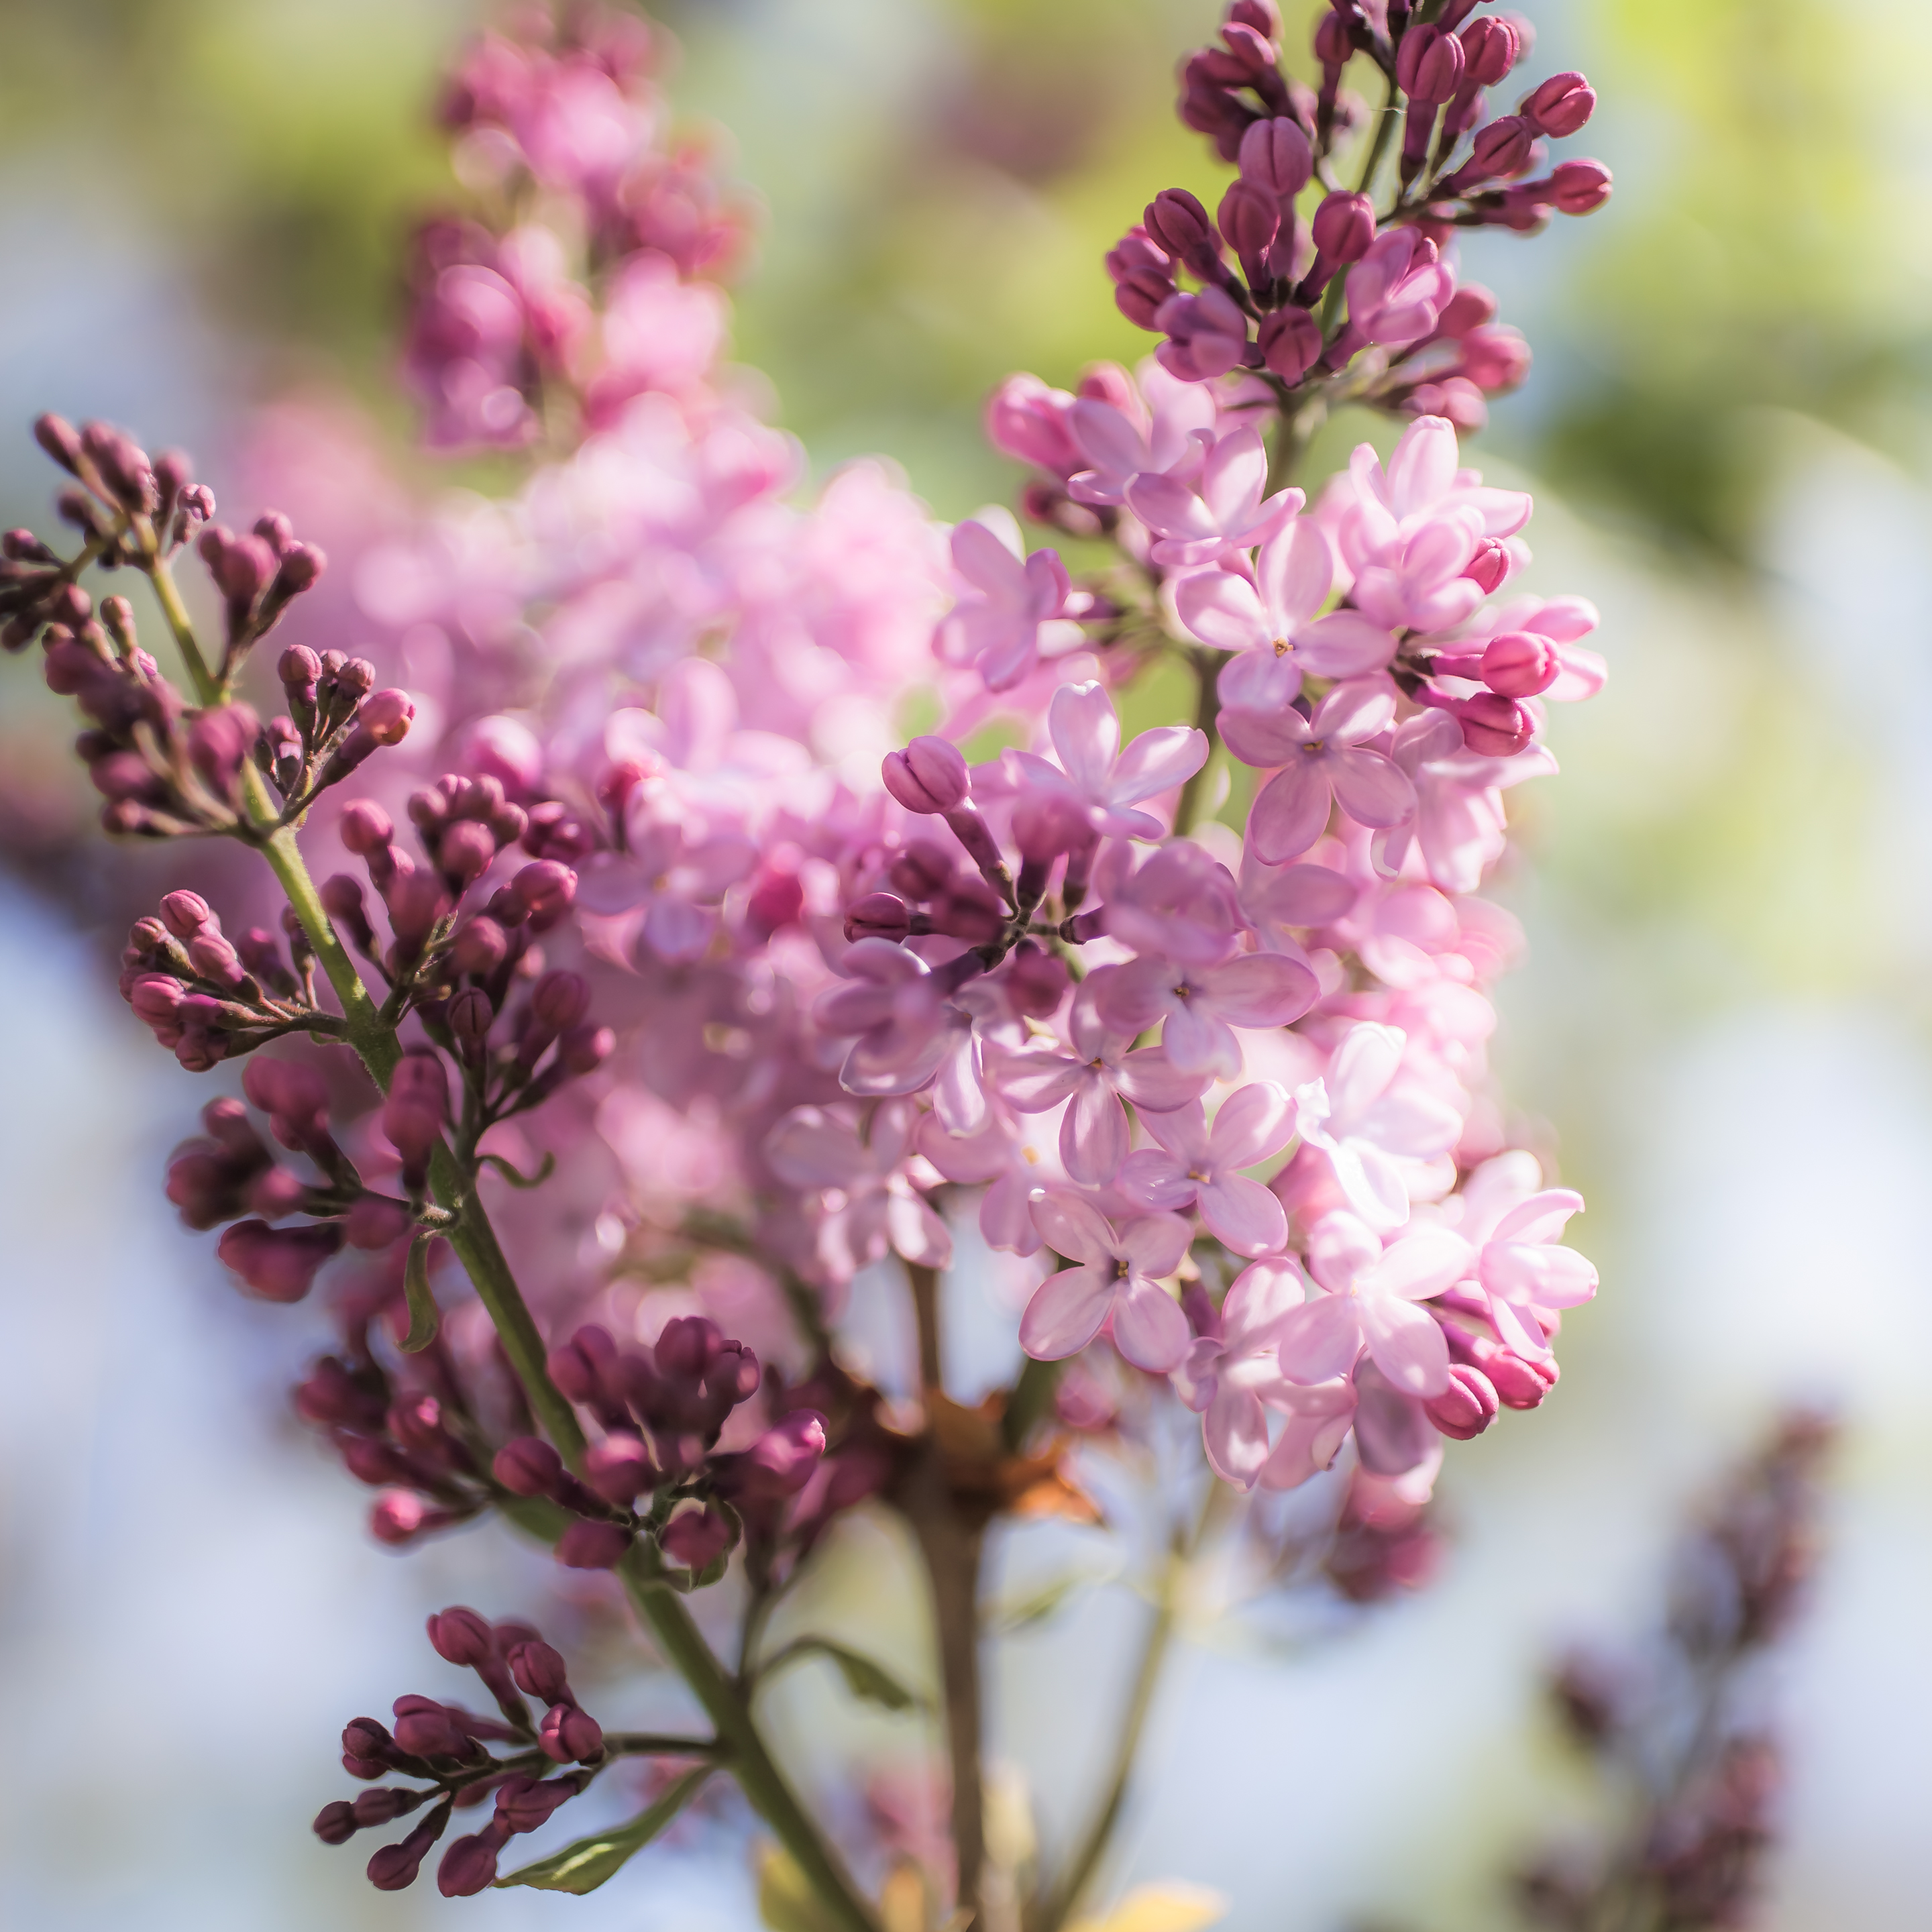 35mm wide open square format photo of a blooming lilac in high key light surrounded by bokeh.